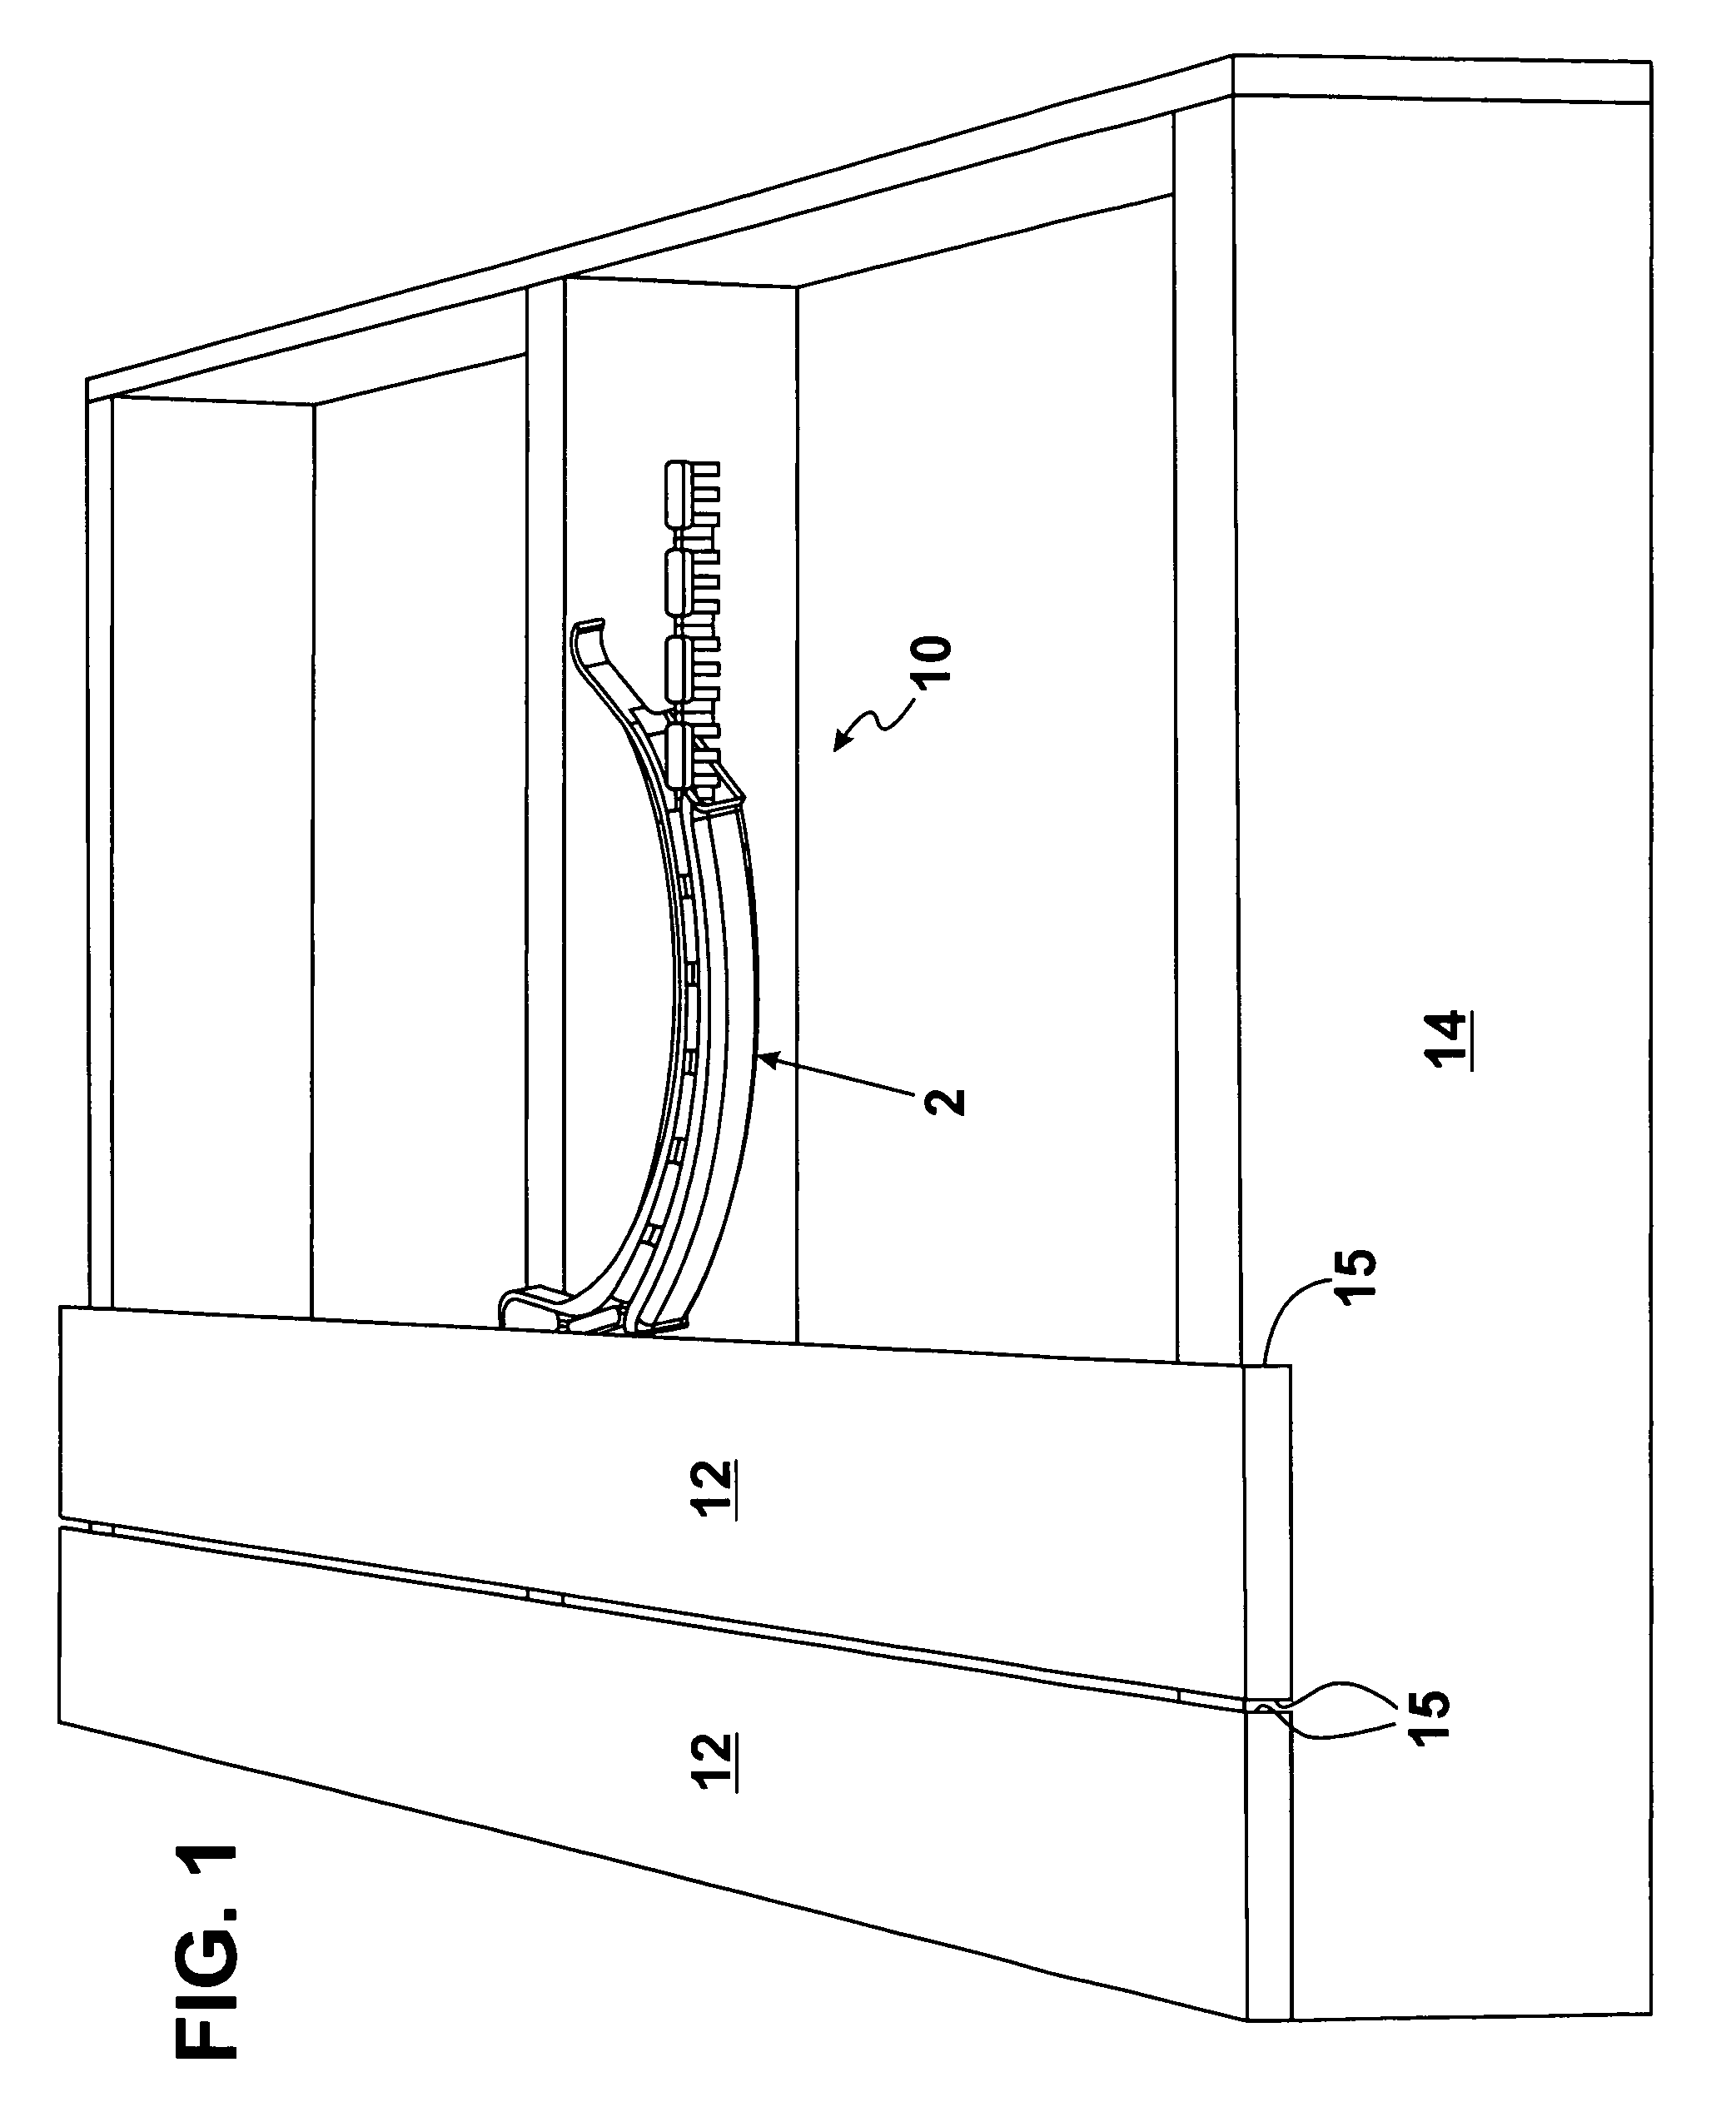 Interconnected and on-site severable deck clips with cooperating installation tool for joining two adjacent decking planks to an underlying support structure